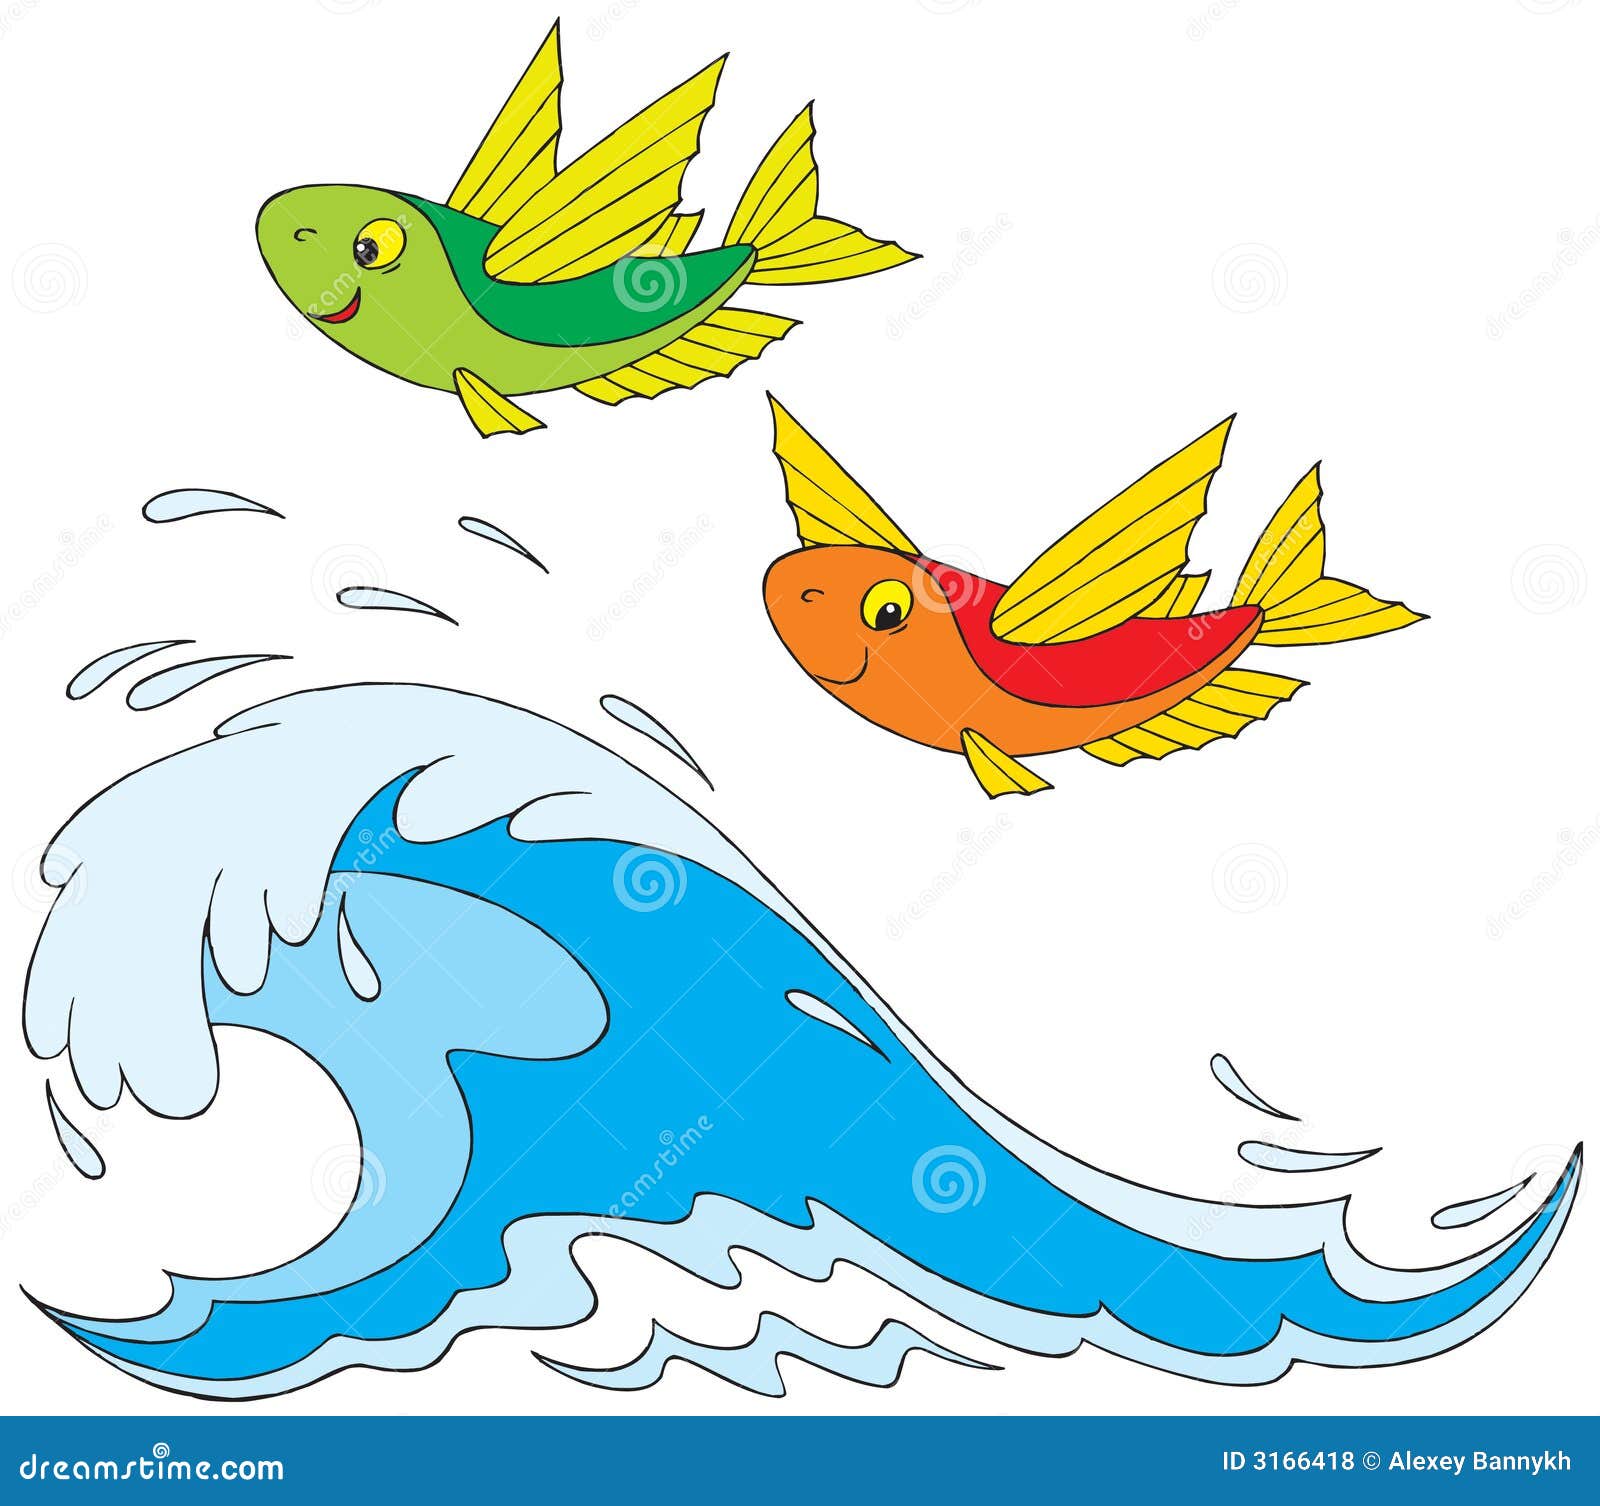 clipart flying fish - photo #5